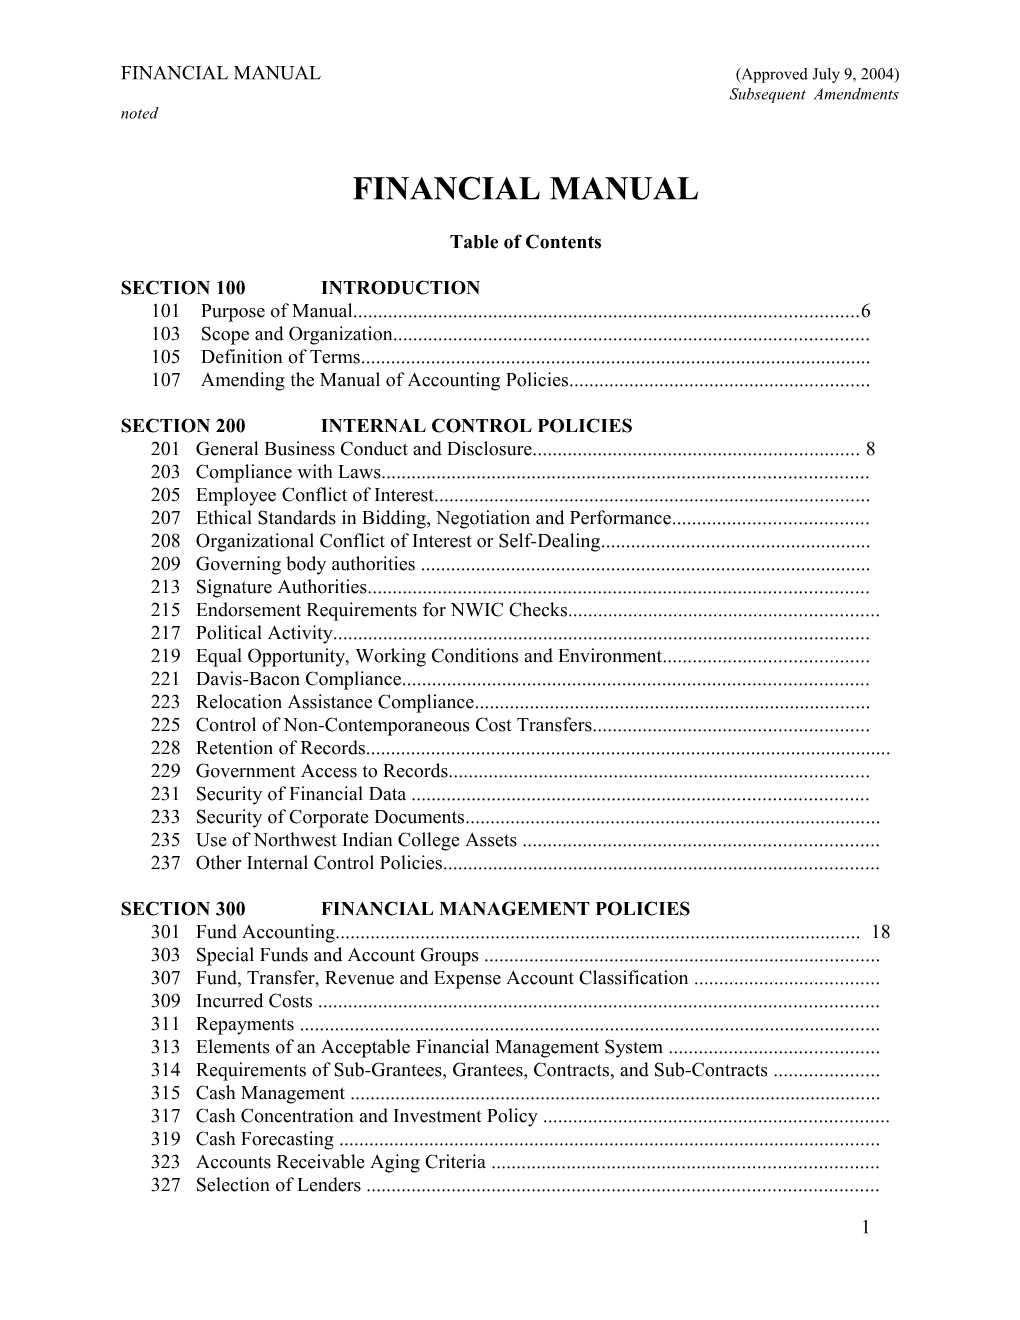 FINANCIAL MANUAL (Approved July 9, 2004)